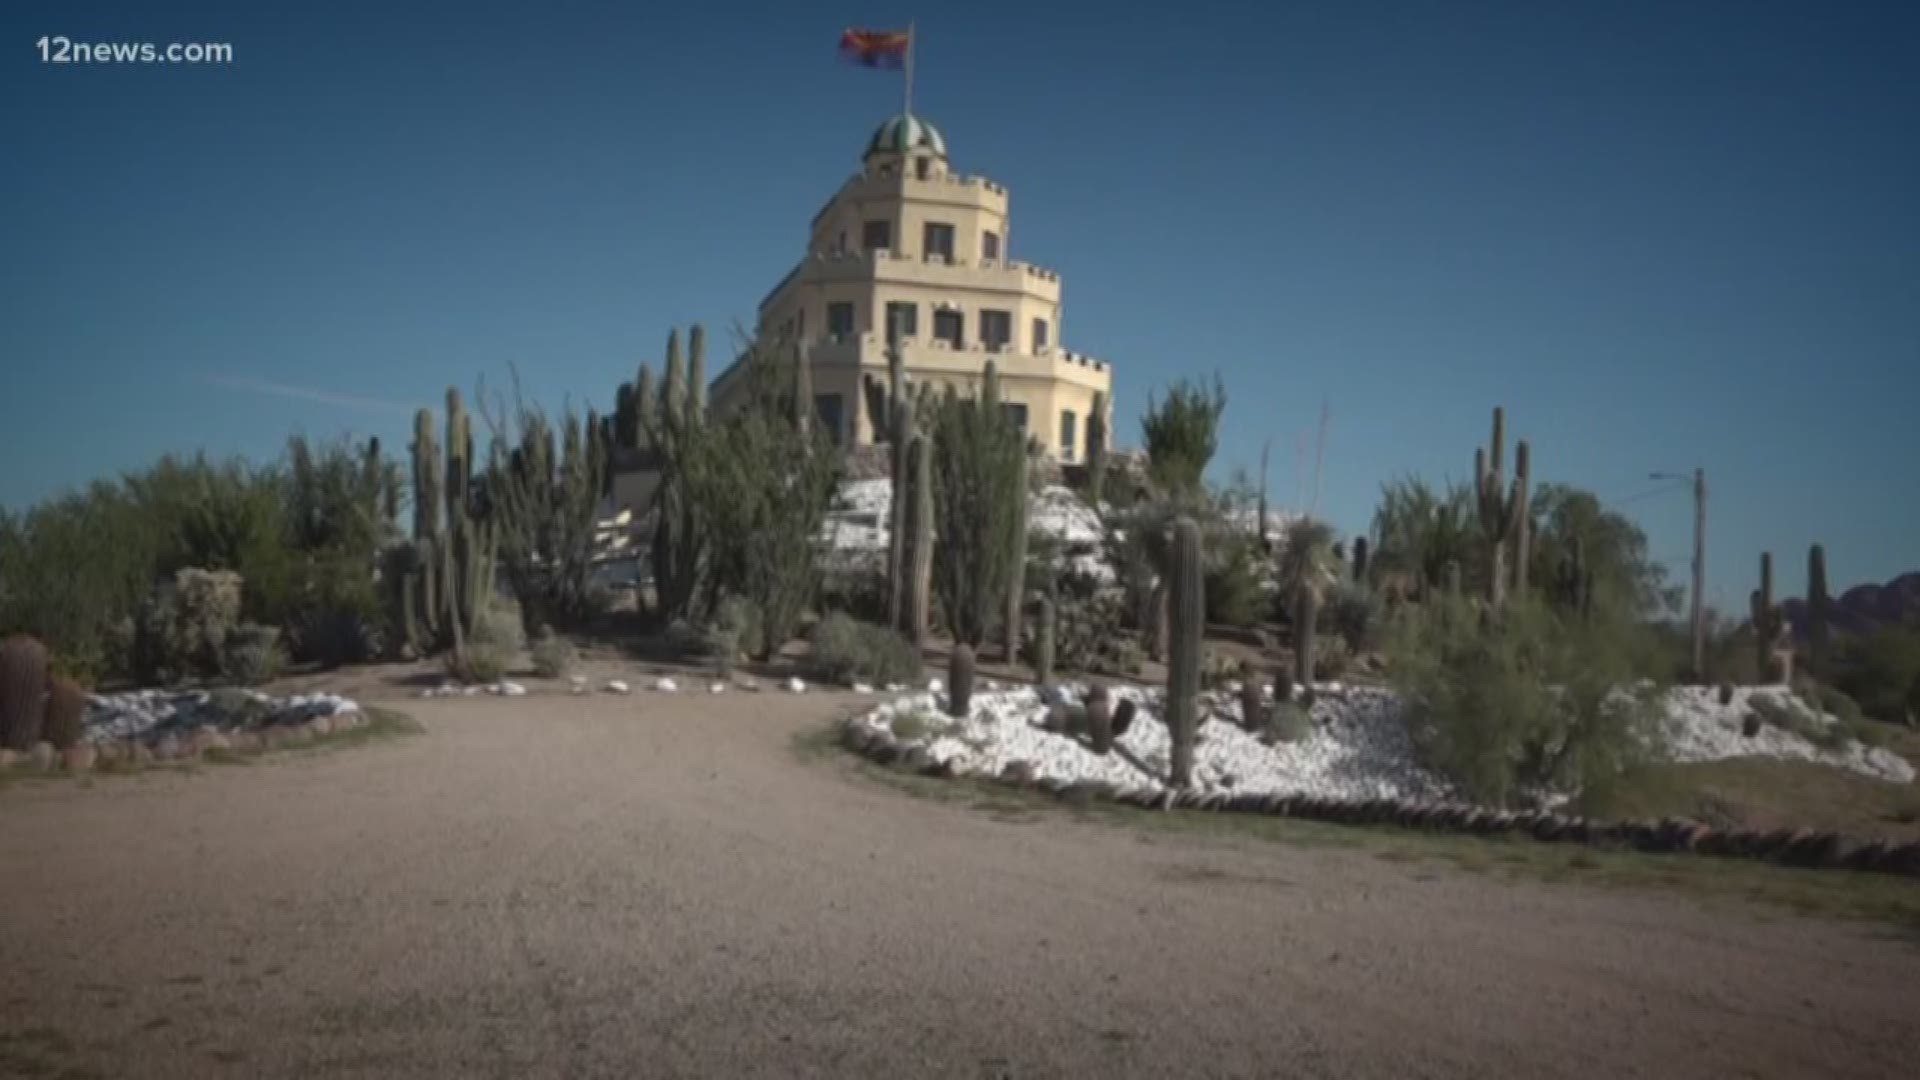 We're taking a look at the unique story behind the mysterious Tovrea Castle in central Phoenix.